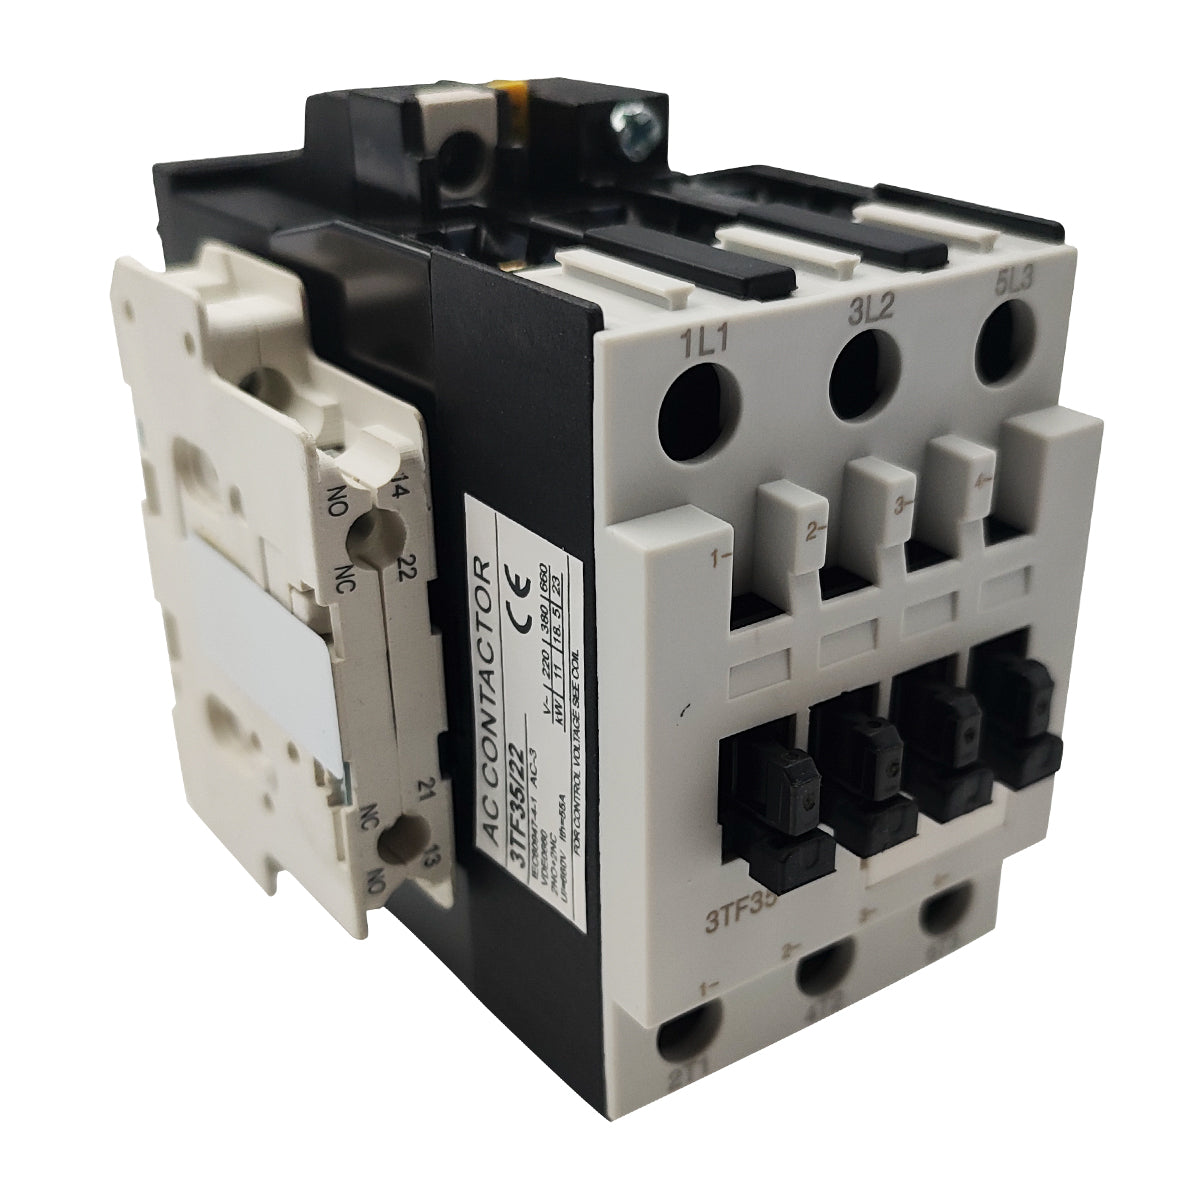 3TF48 Contactor NEW Direct Replacement  Siemens World Series 3TF4822 110/120V 